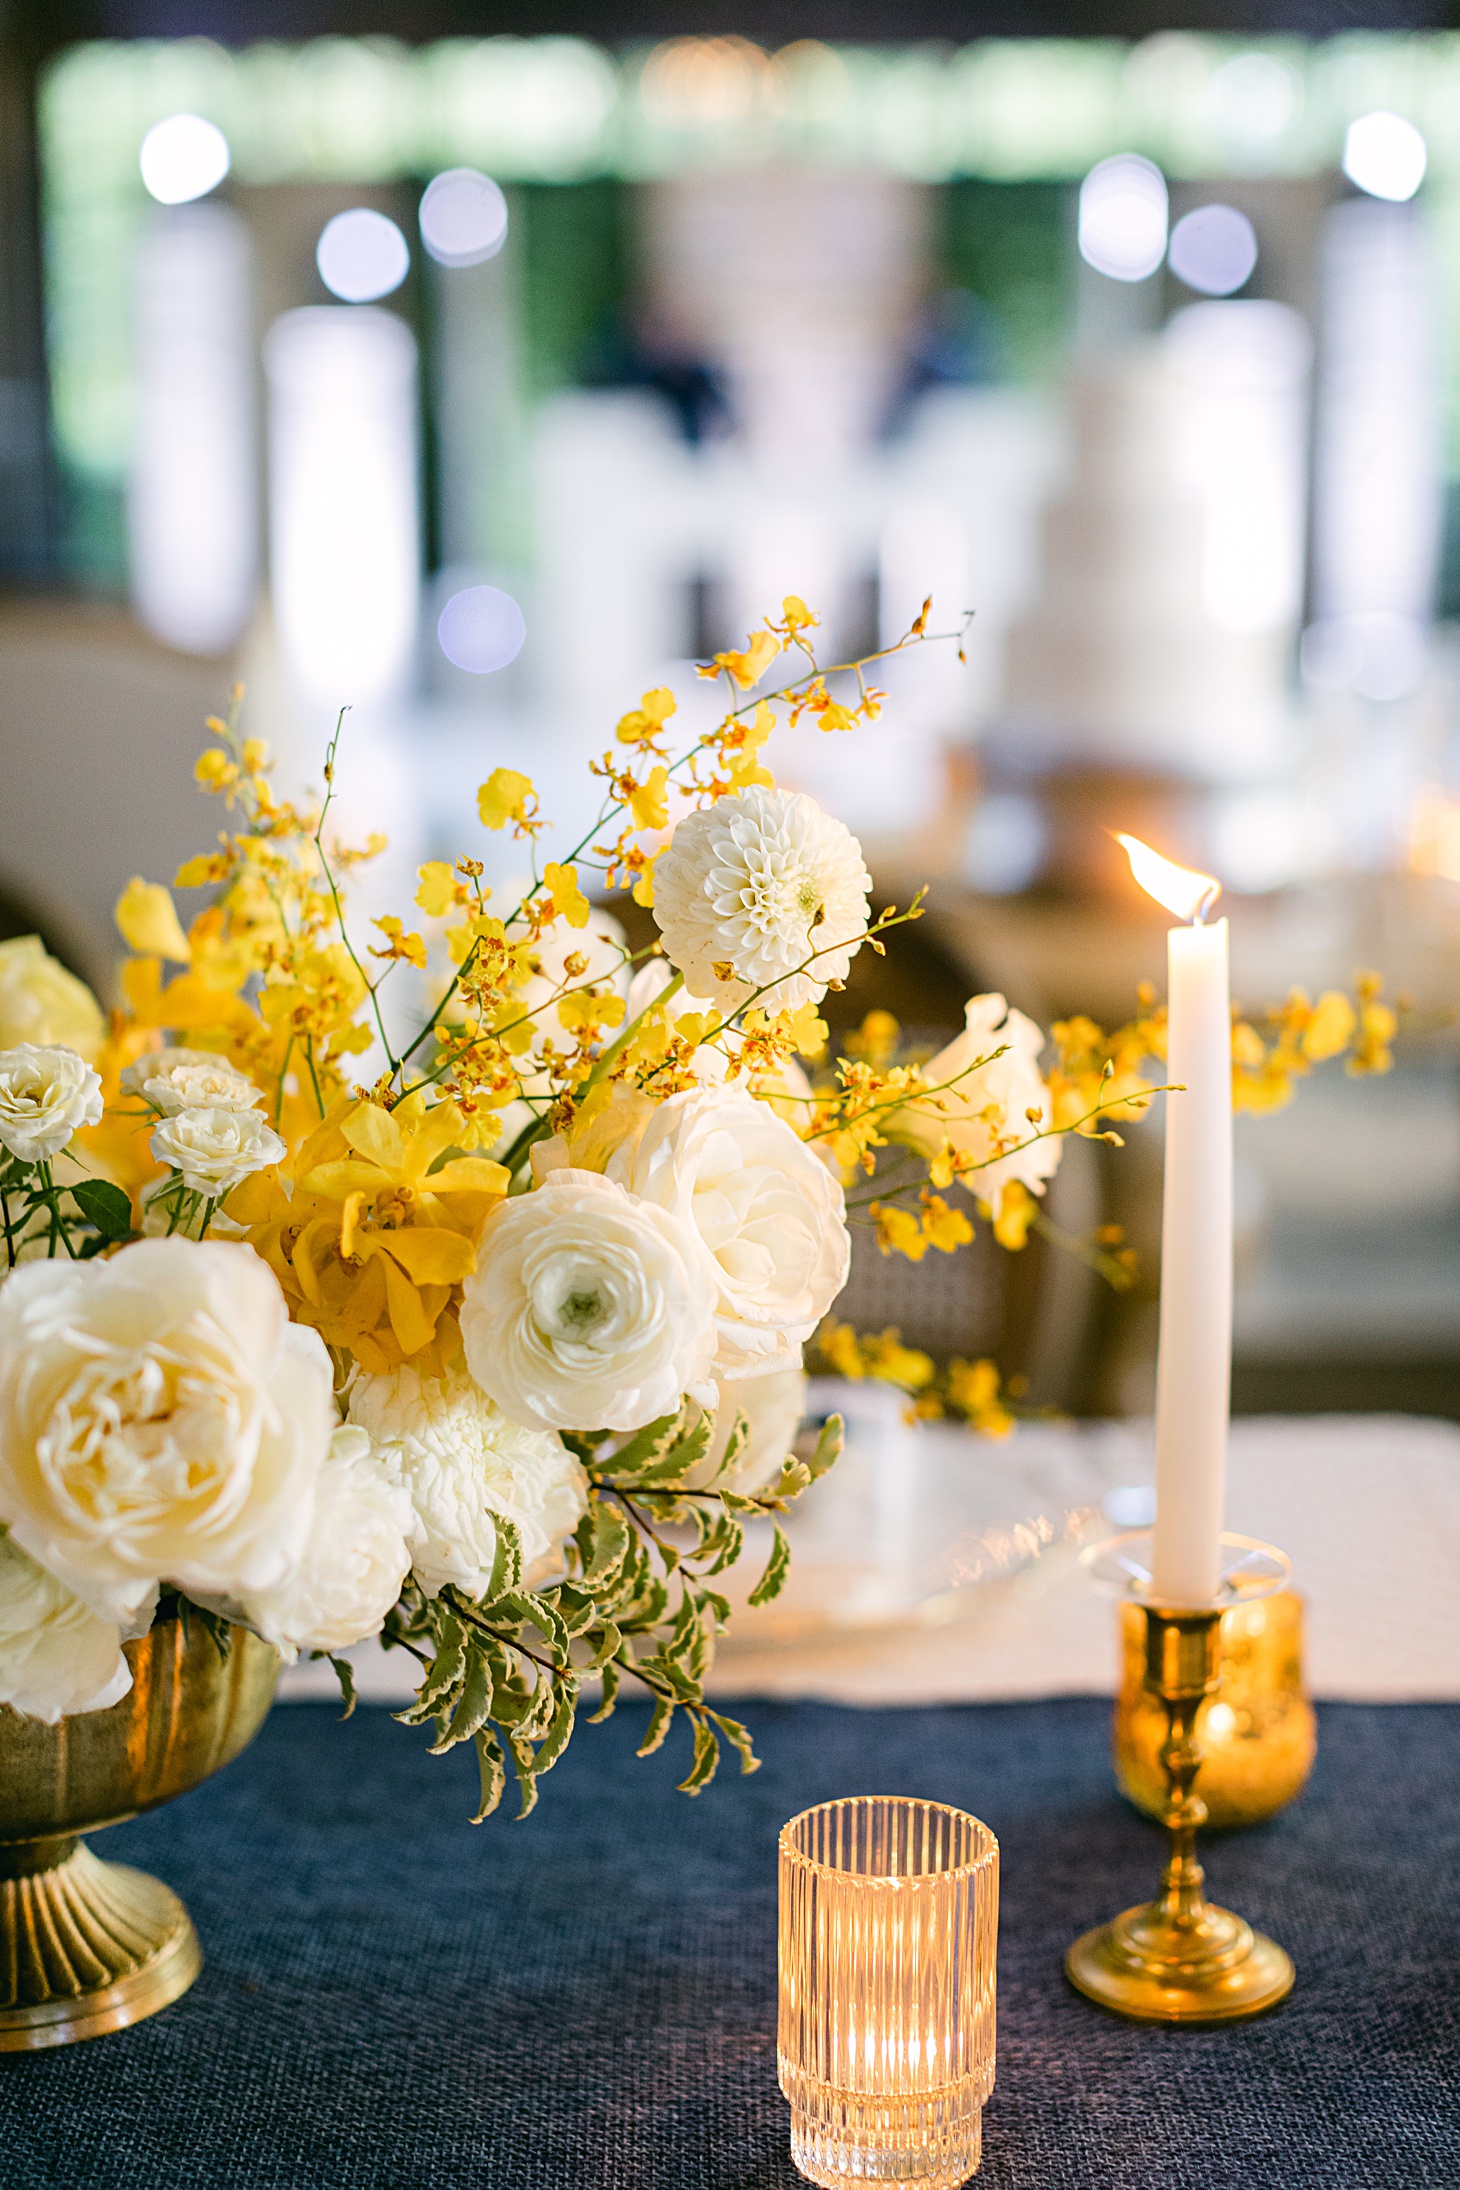 Organic yellow and white floral centerpiece by Kate Asire  at The Farm at Old Edwards Inn wedding by Sarah Bradshaw Photography